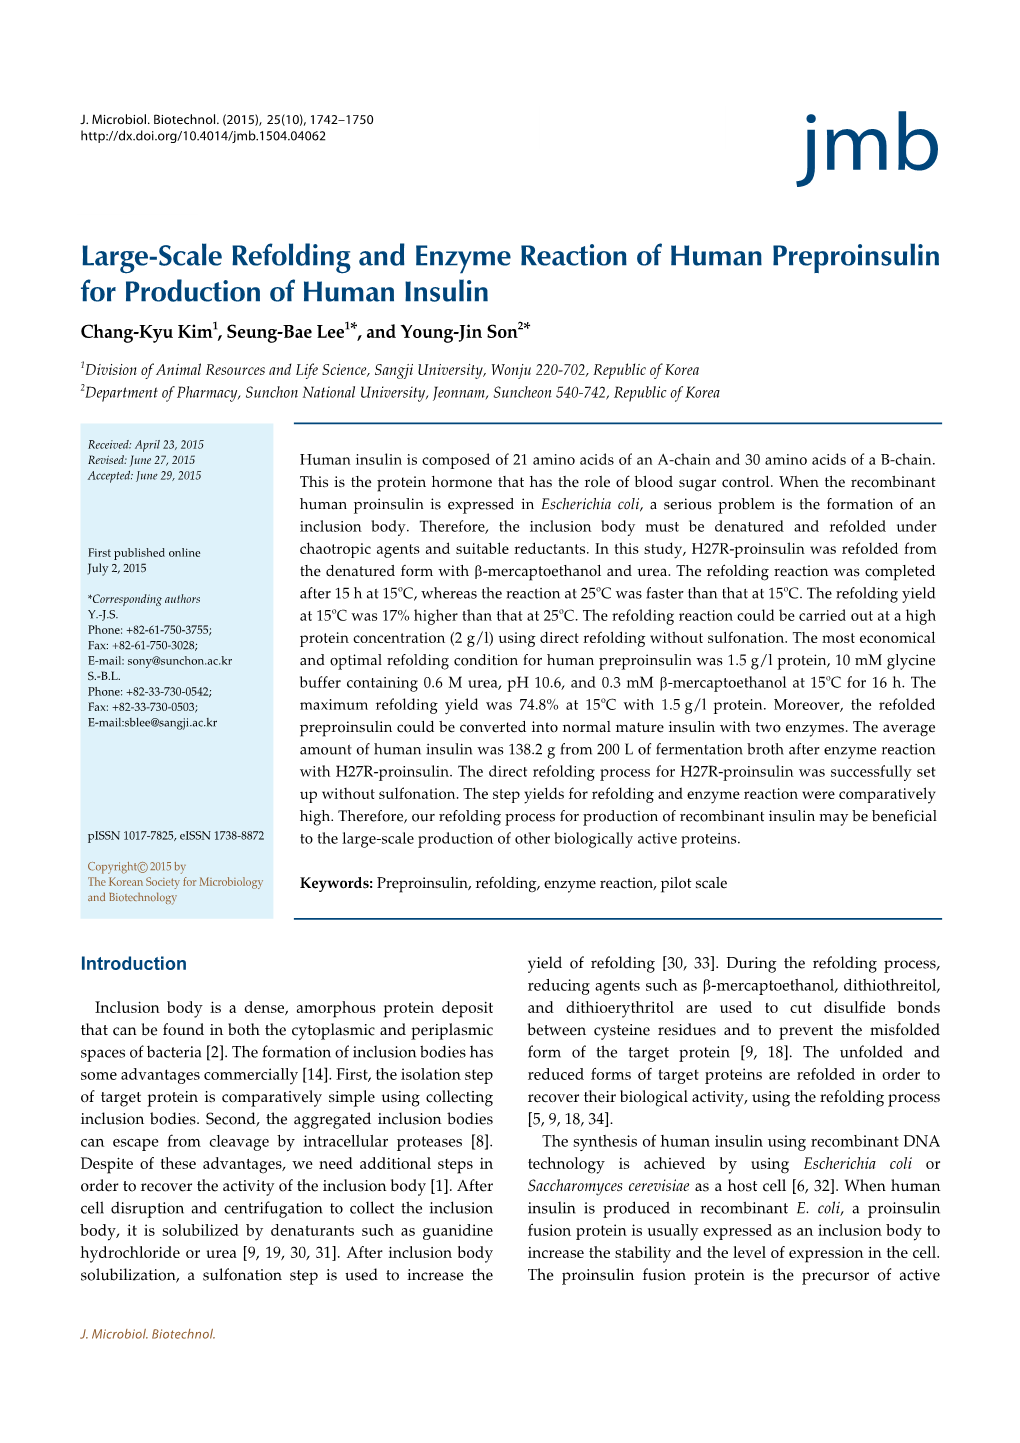 Large-Scale Refolding and Enzyme Reaction of Human Preproinsulin for Production of Human Insulin Chang-Kyu Kim1, Seung-Bae Lee1*, and Young-Jin Son2*